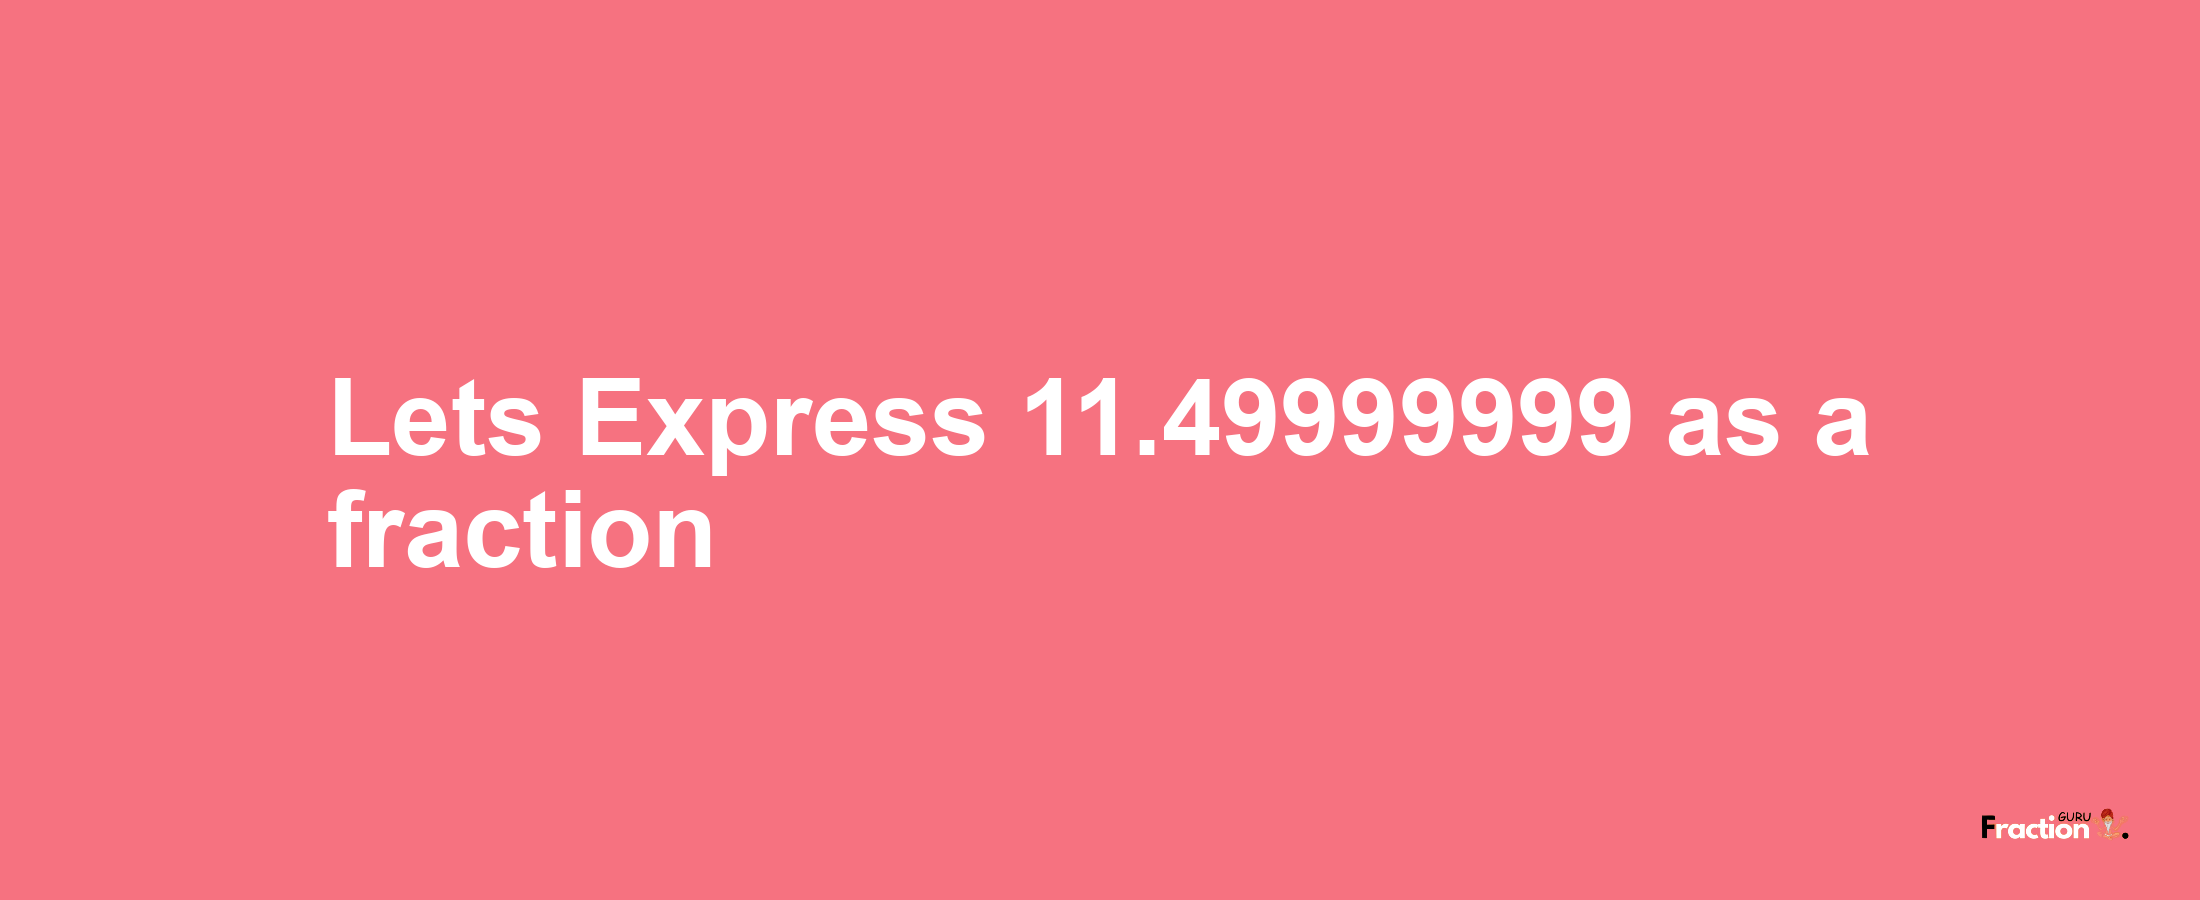 Lets Express 11.49999999 as afraction